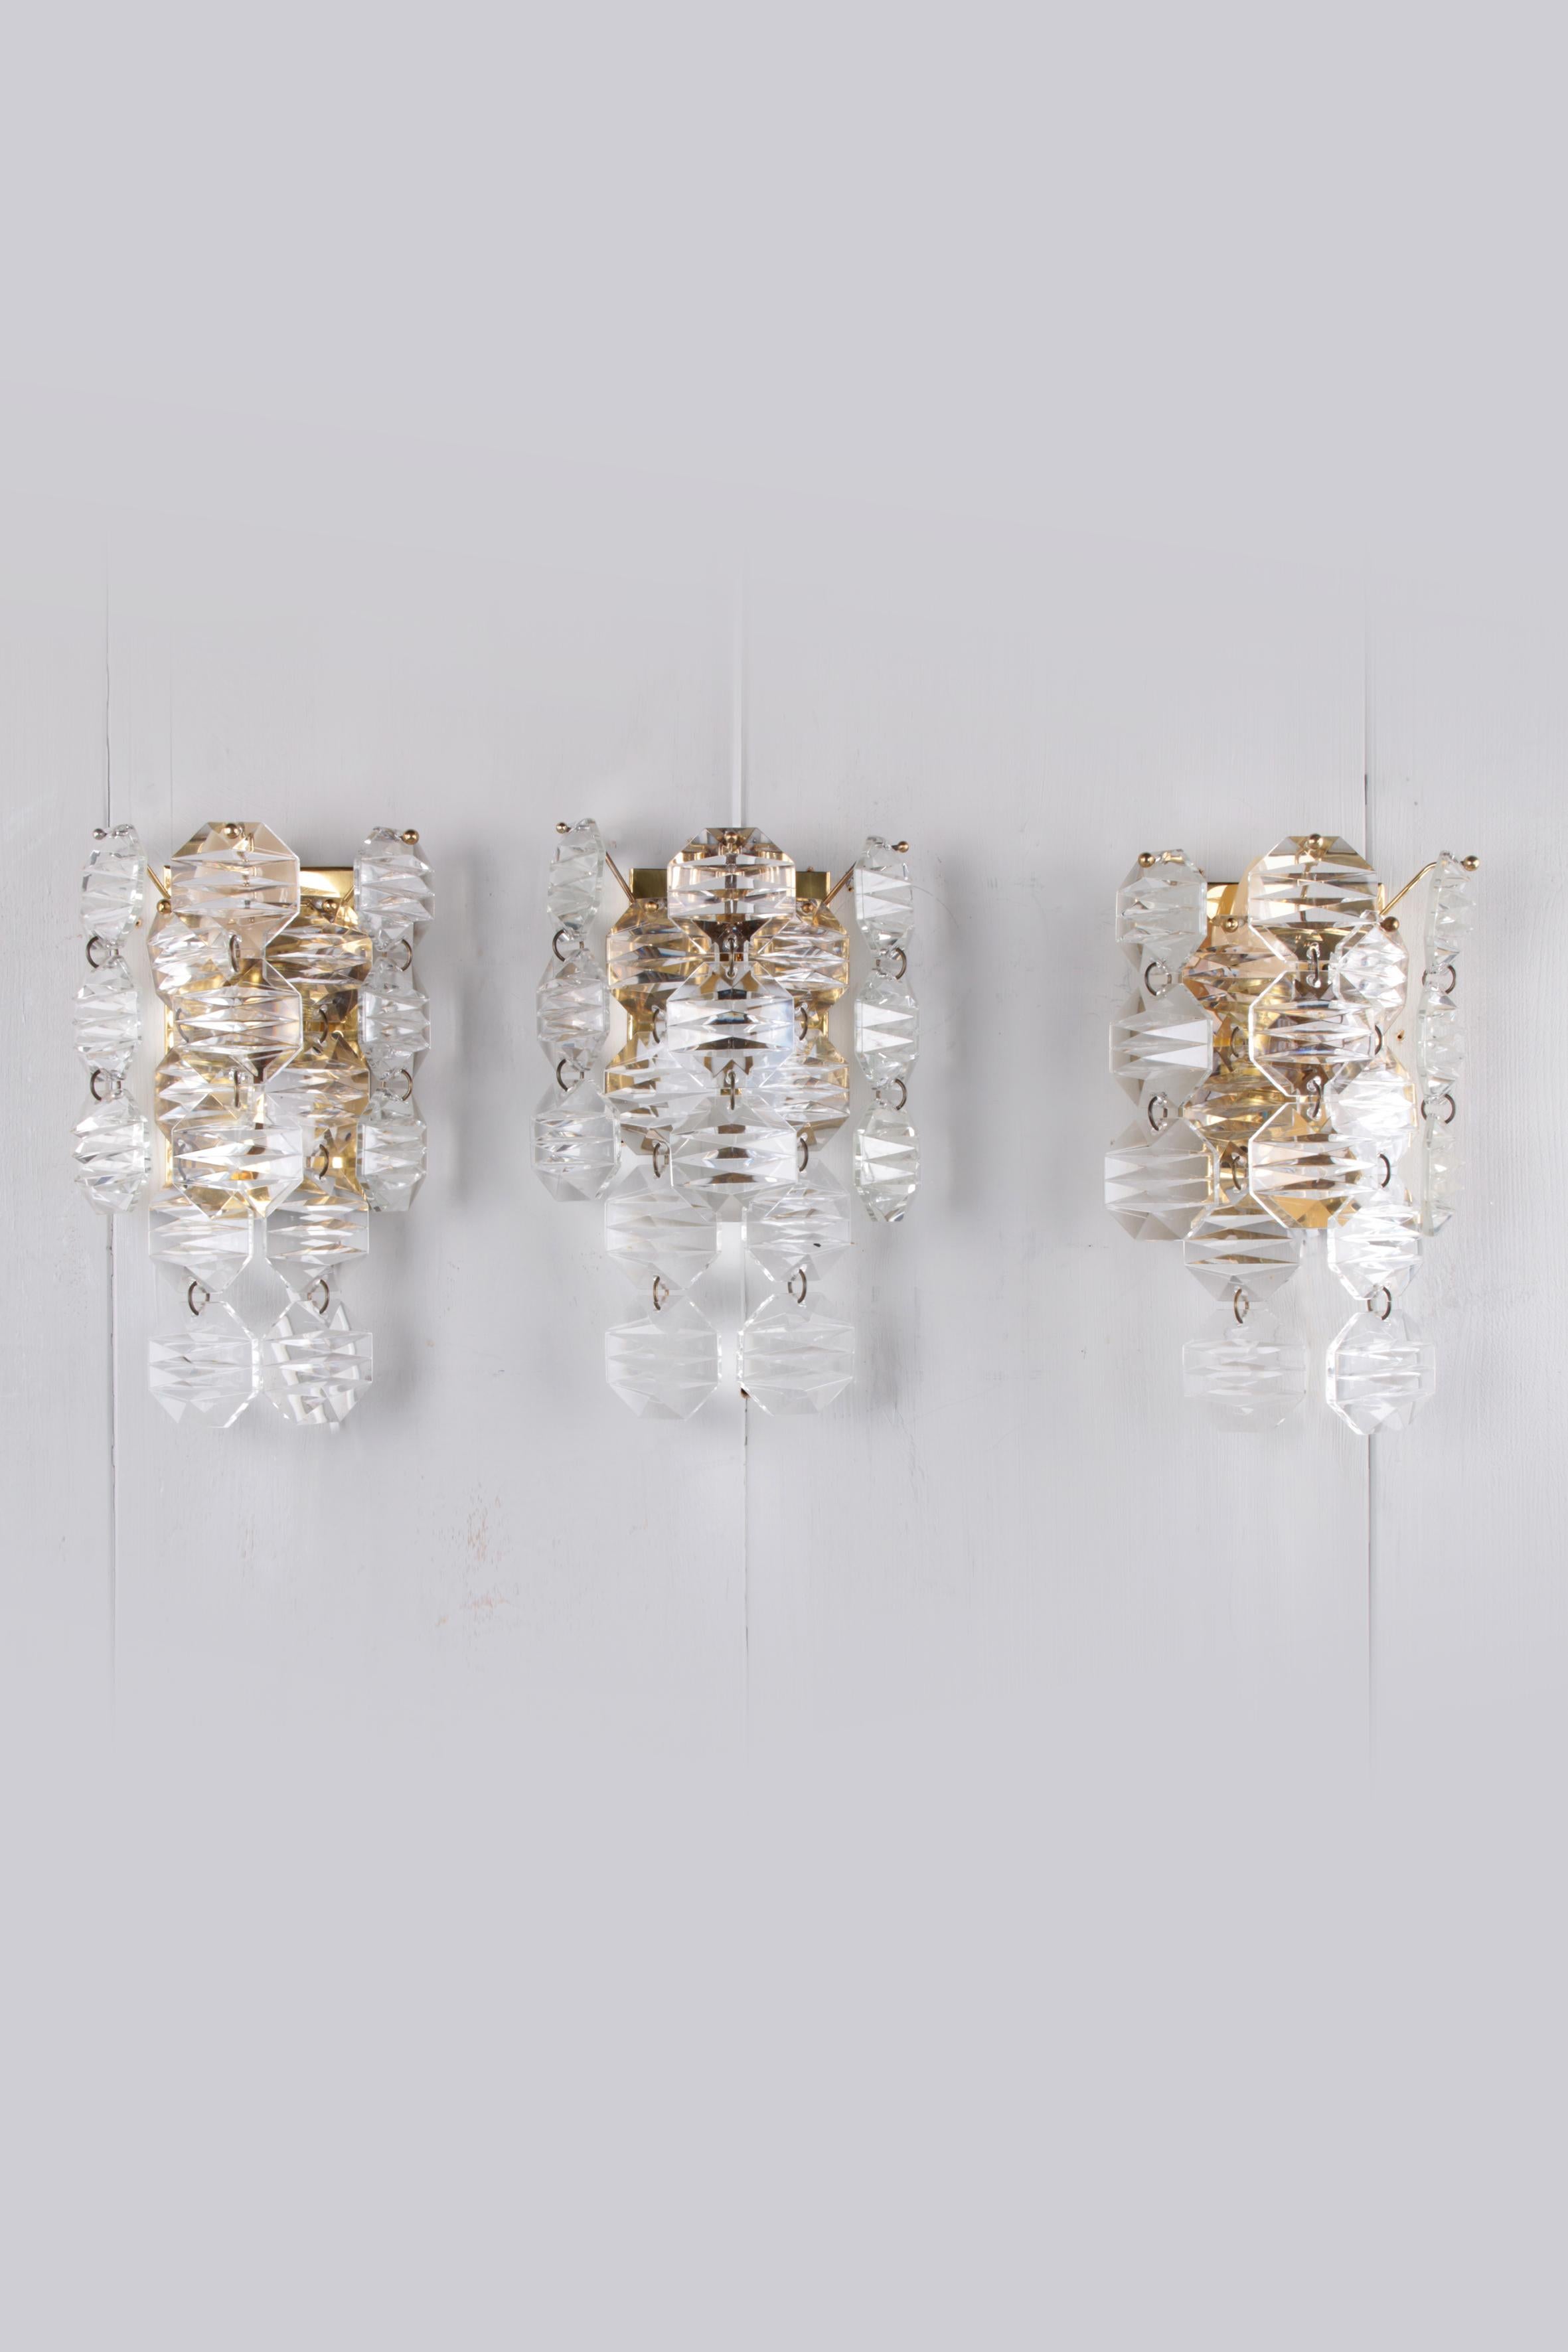 3 Very nice BIG and Rare Crystal Wall Lamps From  J.T. Kalmar, 1960s For Sale 7